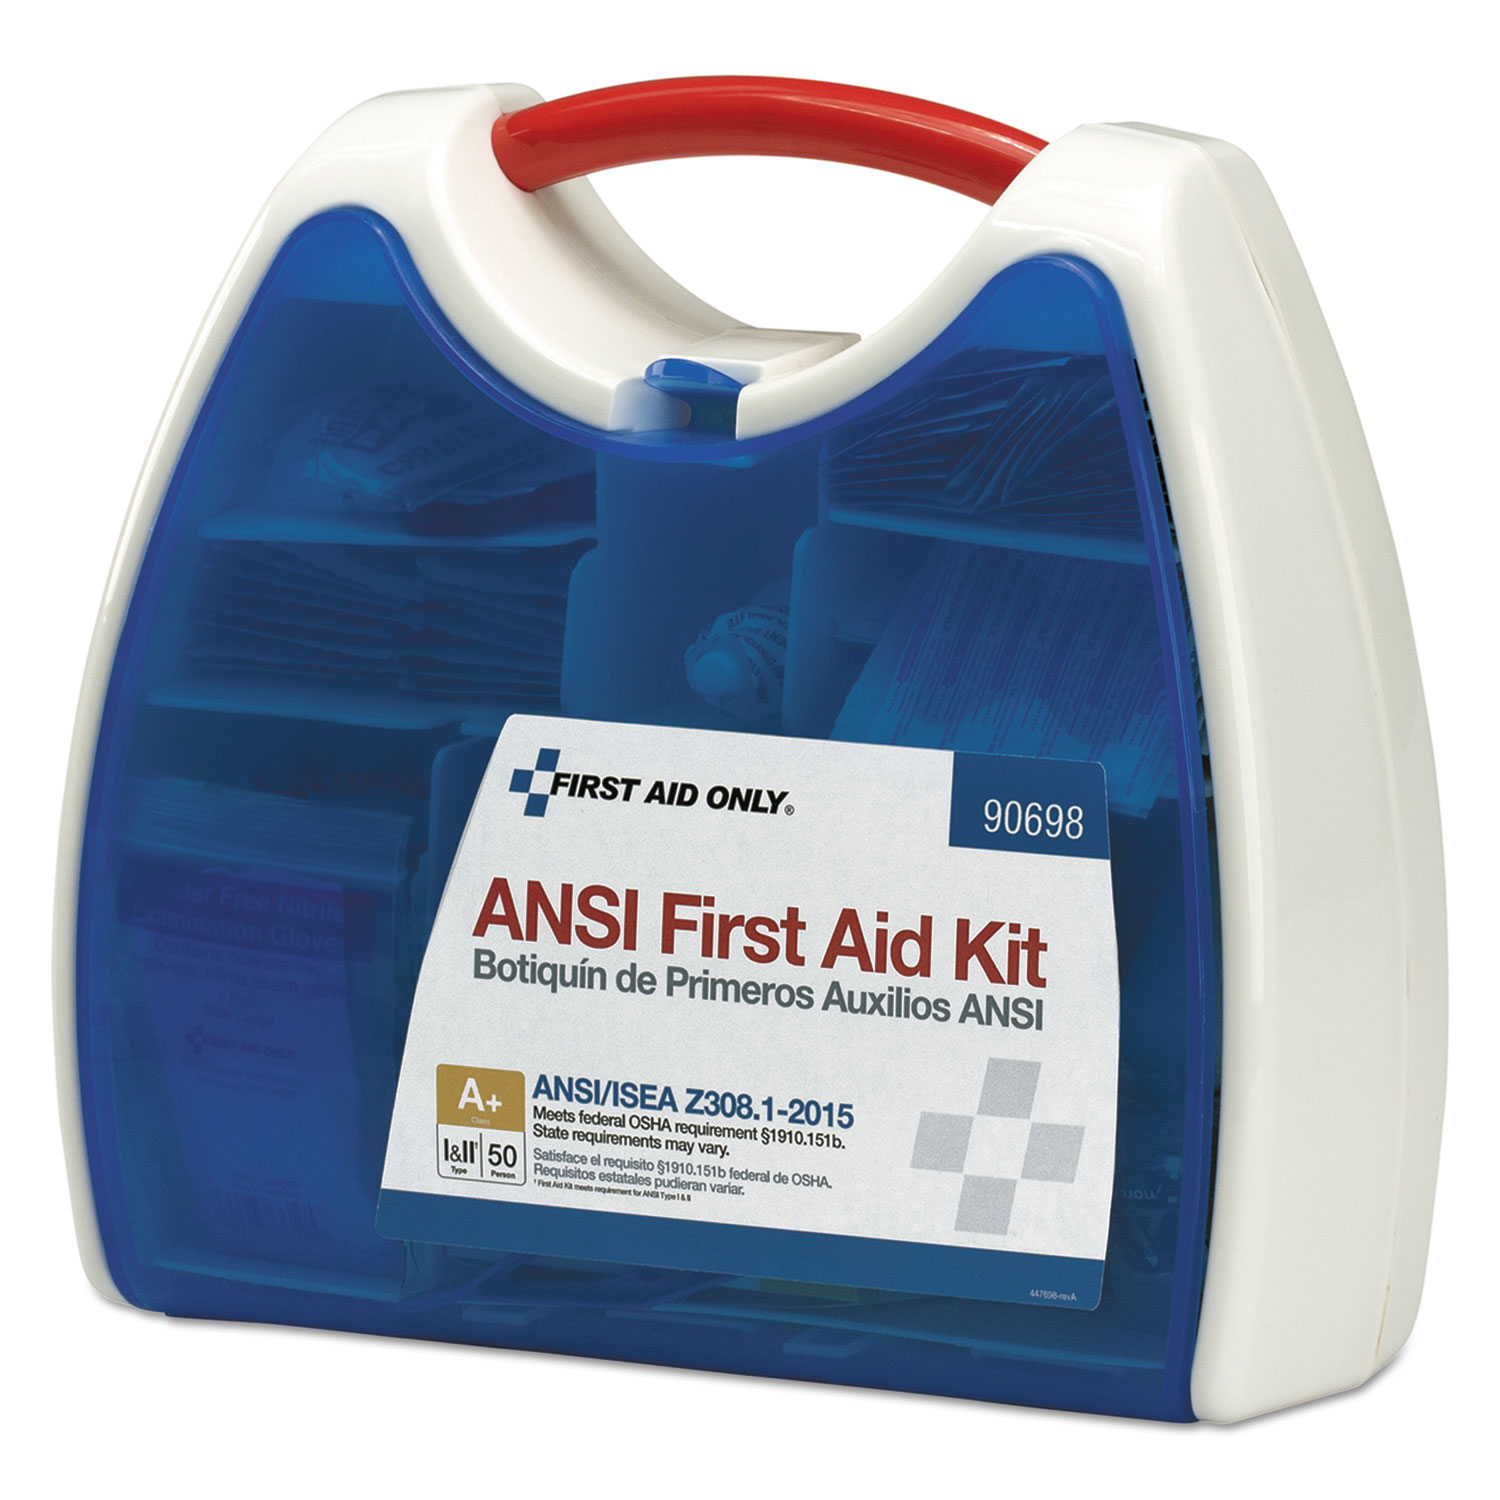 Physicianscare ReadyCare First Aid Kit for up to 50 People 355 Pieces/Kit 90698 - image 5 of 5